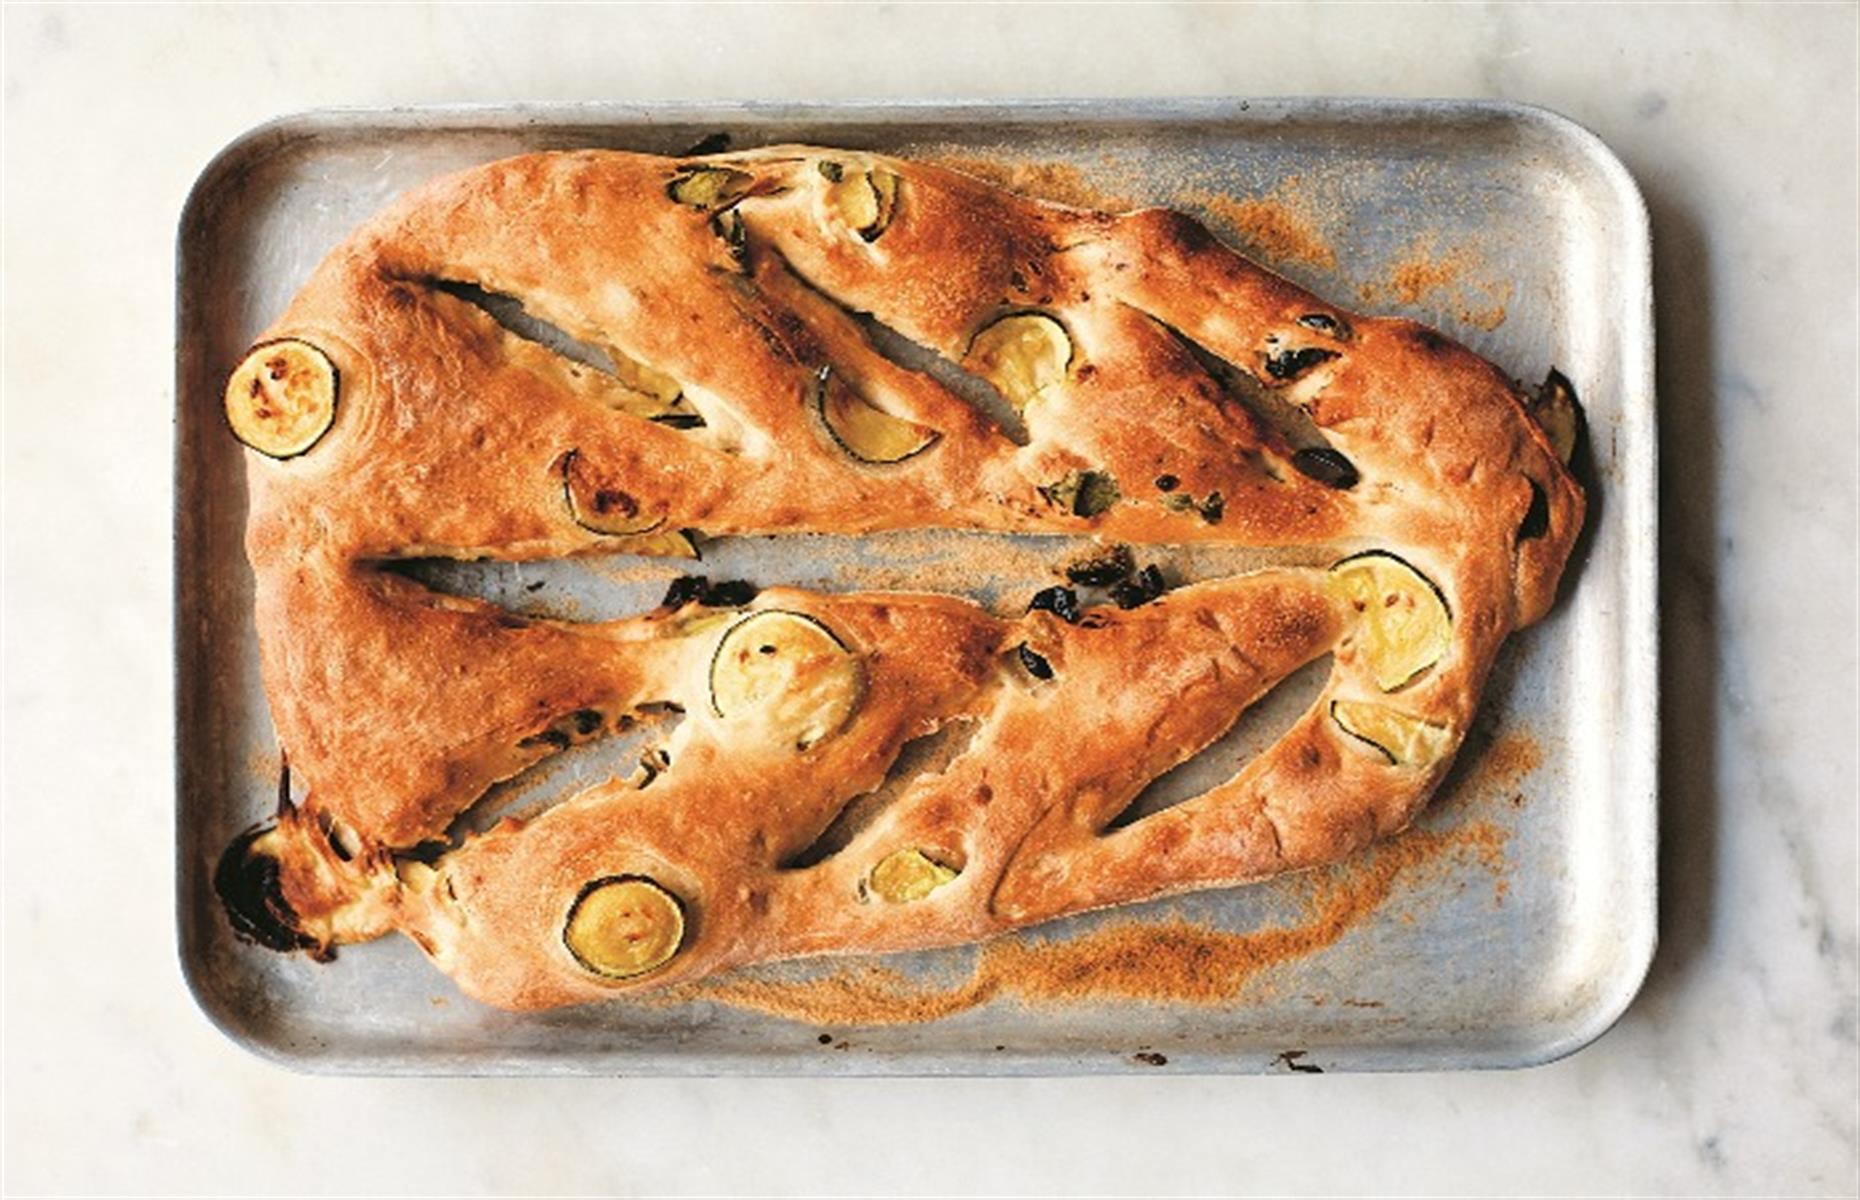 <p>Fougasse is the southern French cousin of Italy's focaccia, albeit with a chewier crust. It's traditionally shaped like a blade of wheat and baked in a very hot oven – if you have a baking or pizza stone, use it here to achieve the signature crunchy crust. Spraying the oven with water just as you put the bread in also helps to get the bread that bit crispier.</p>  <p><a href="https://www.lovefood.com/recipes/87324/fougasse-with-courgettes-and-olives-recipe"><strong>Get the recipe for fougasse with olives and courgettes here</strong></a></p>